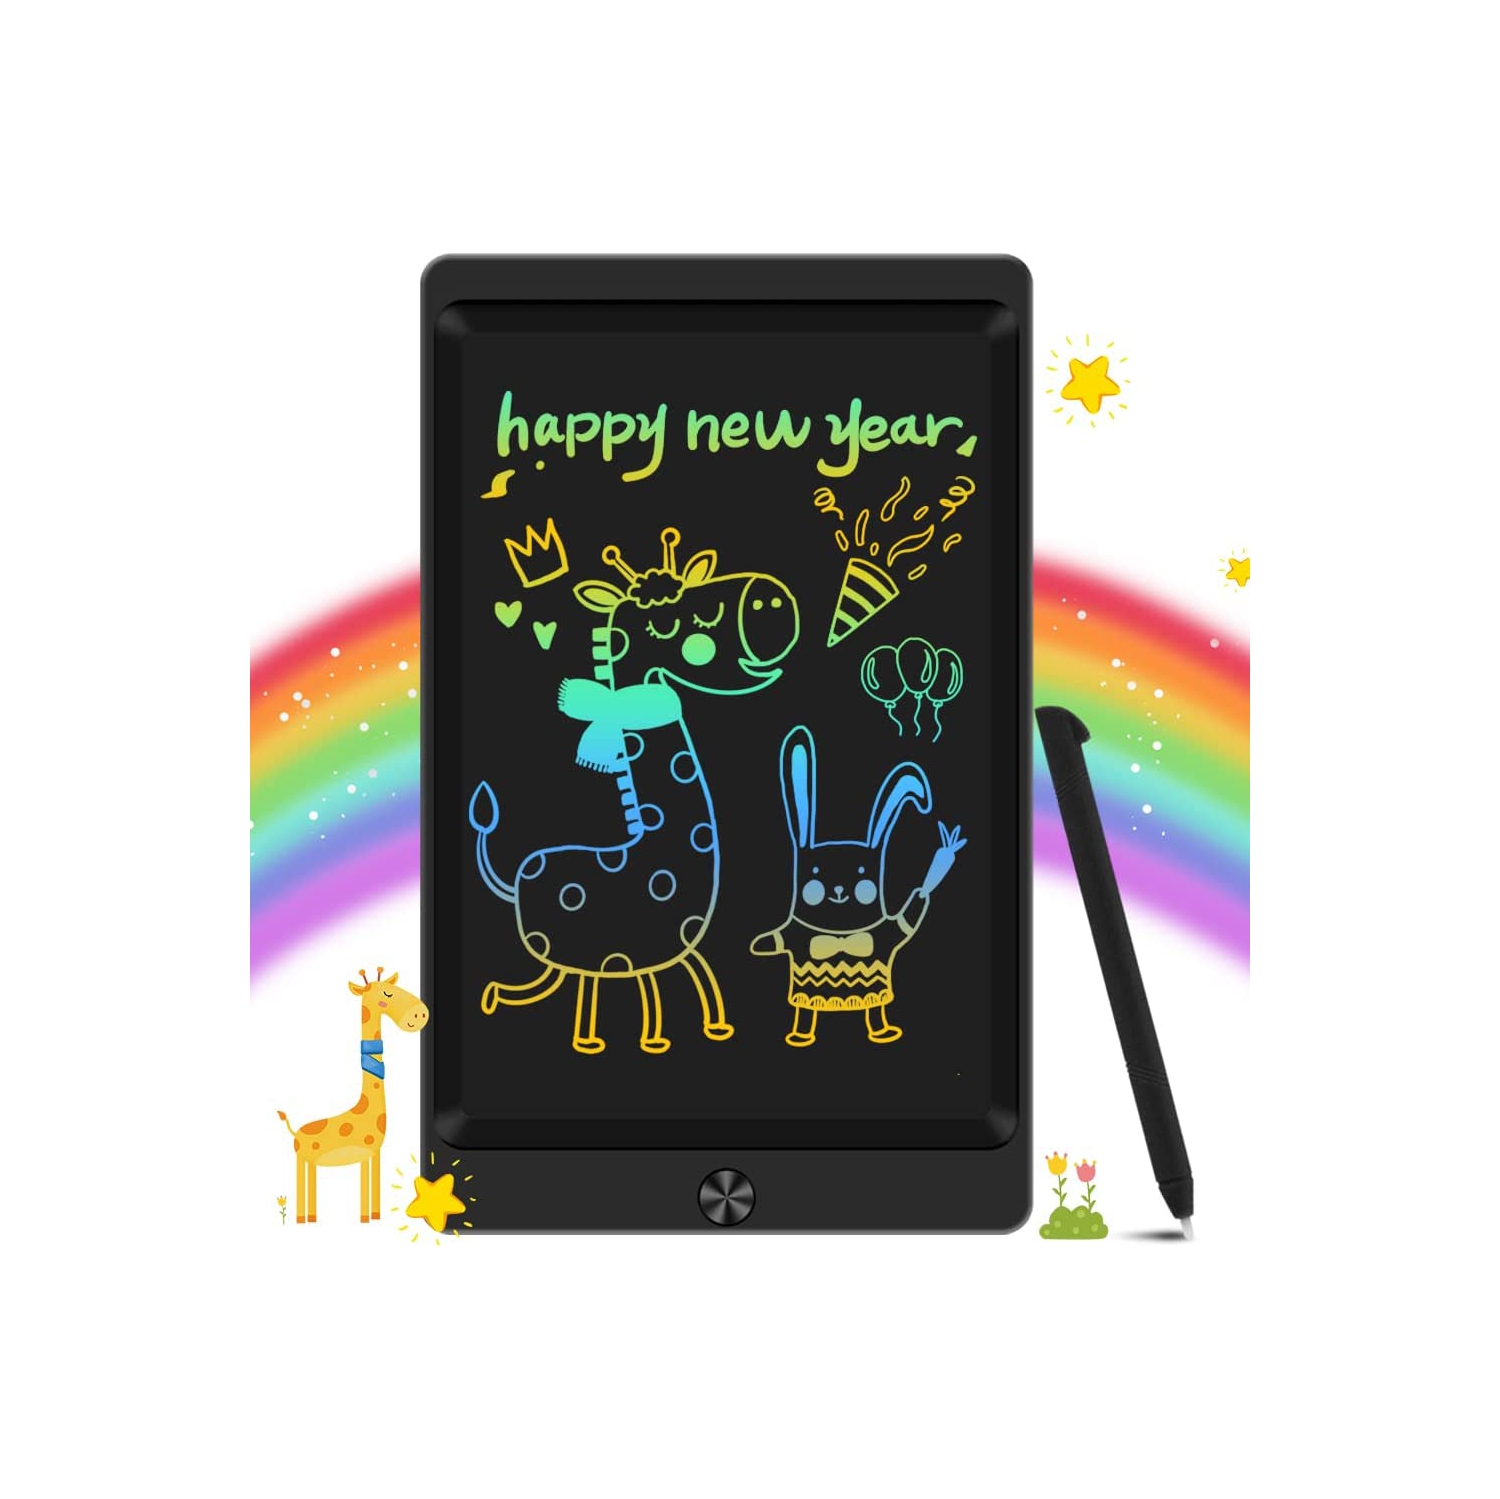 LCD Writing Tablet Drawing Board, Colorful Drawing Tablet Kids Tablets Doodle Board Writing Board for Kids and Adults at Home, School and Office with Lock Erase Button (Black)